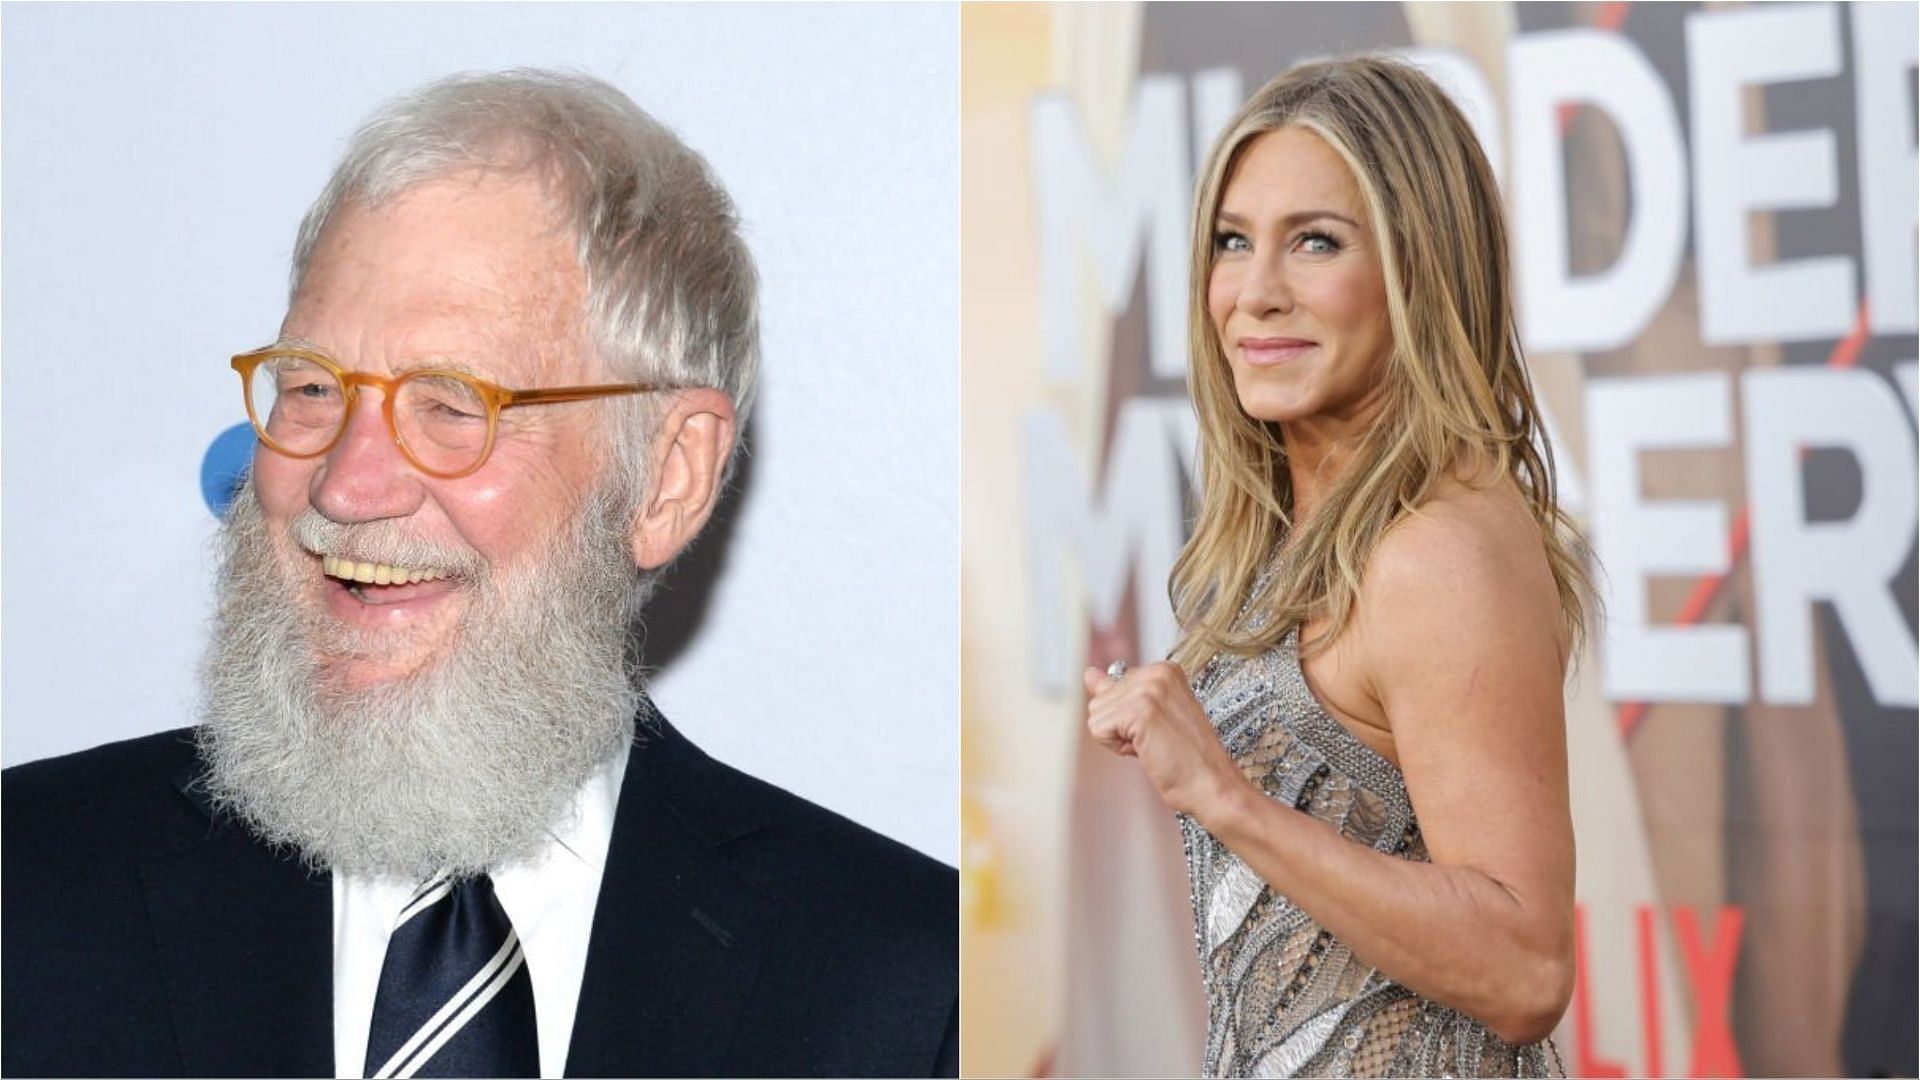 A video of David Letterman and Jennifer Aniston has gone viral on social media platforms (Images via Andrew Toth and Amy Sussman/Getty Images)